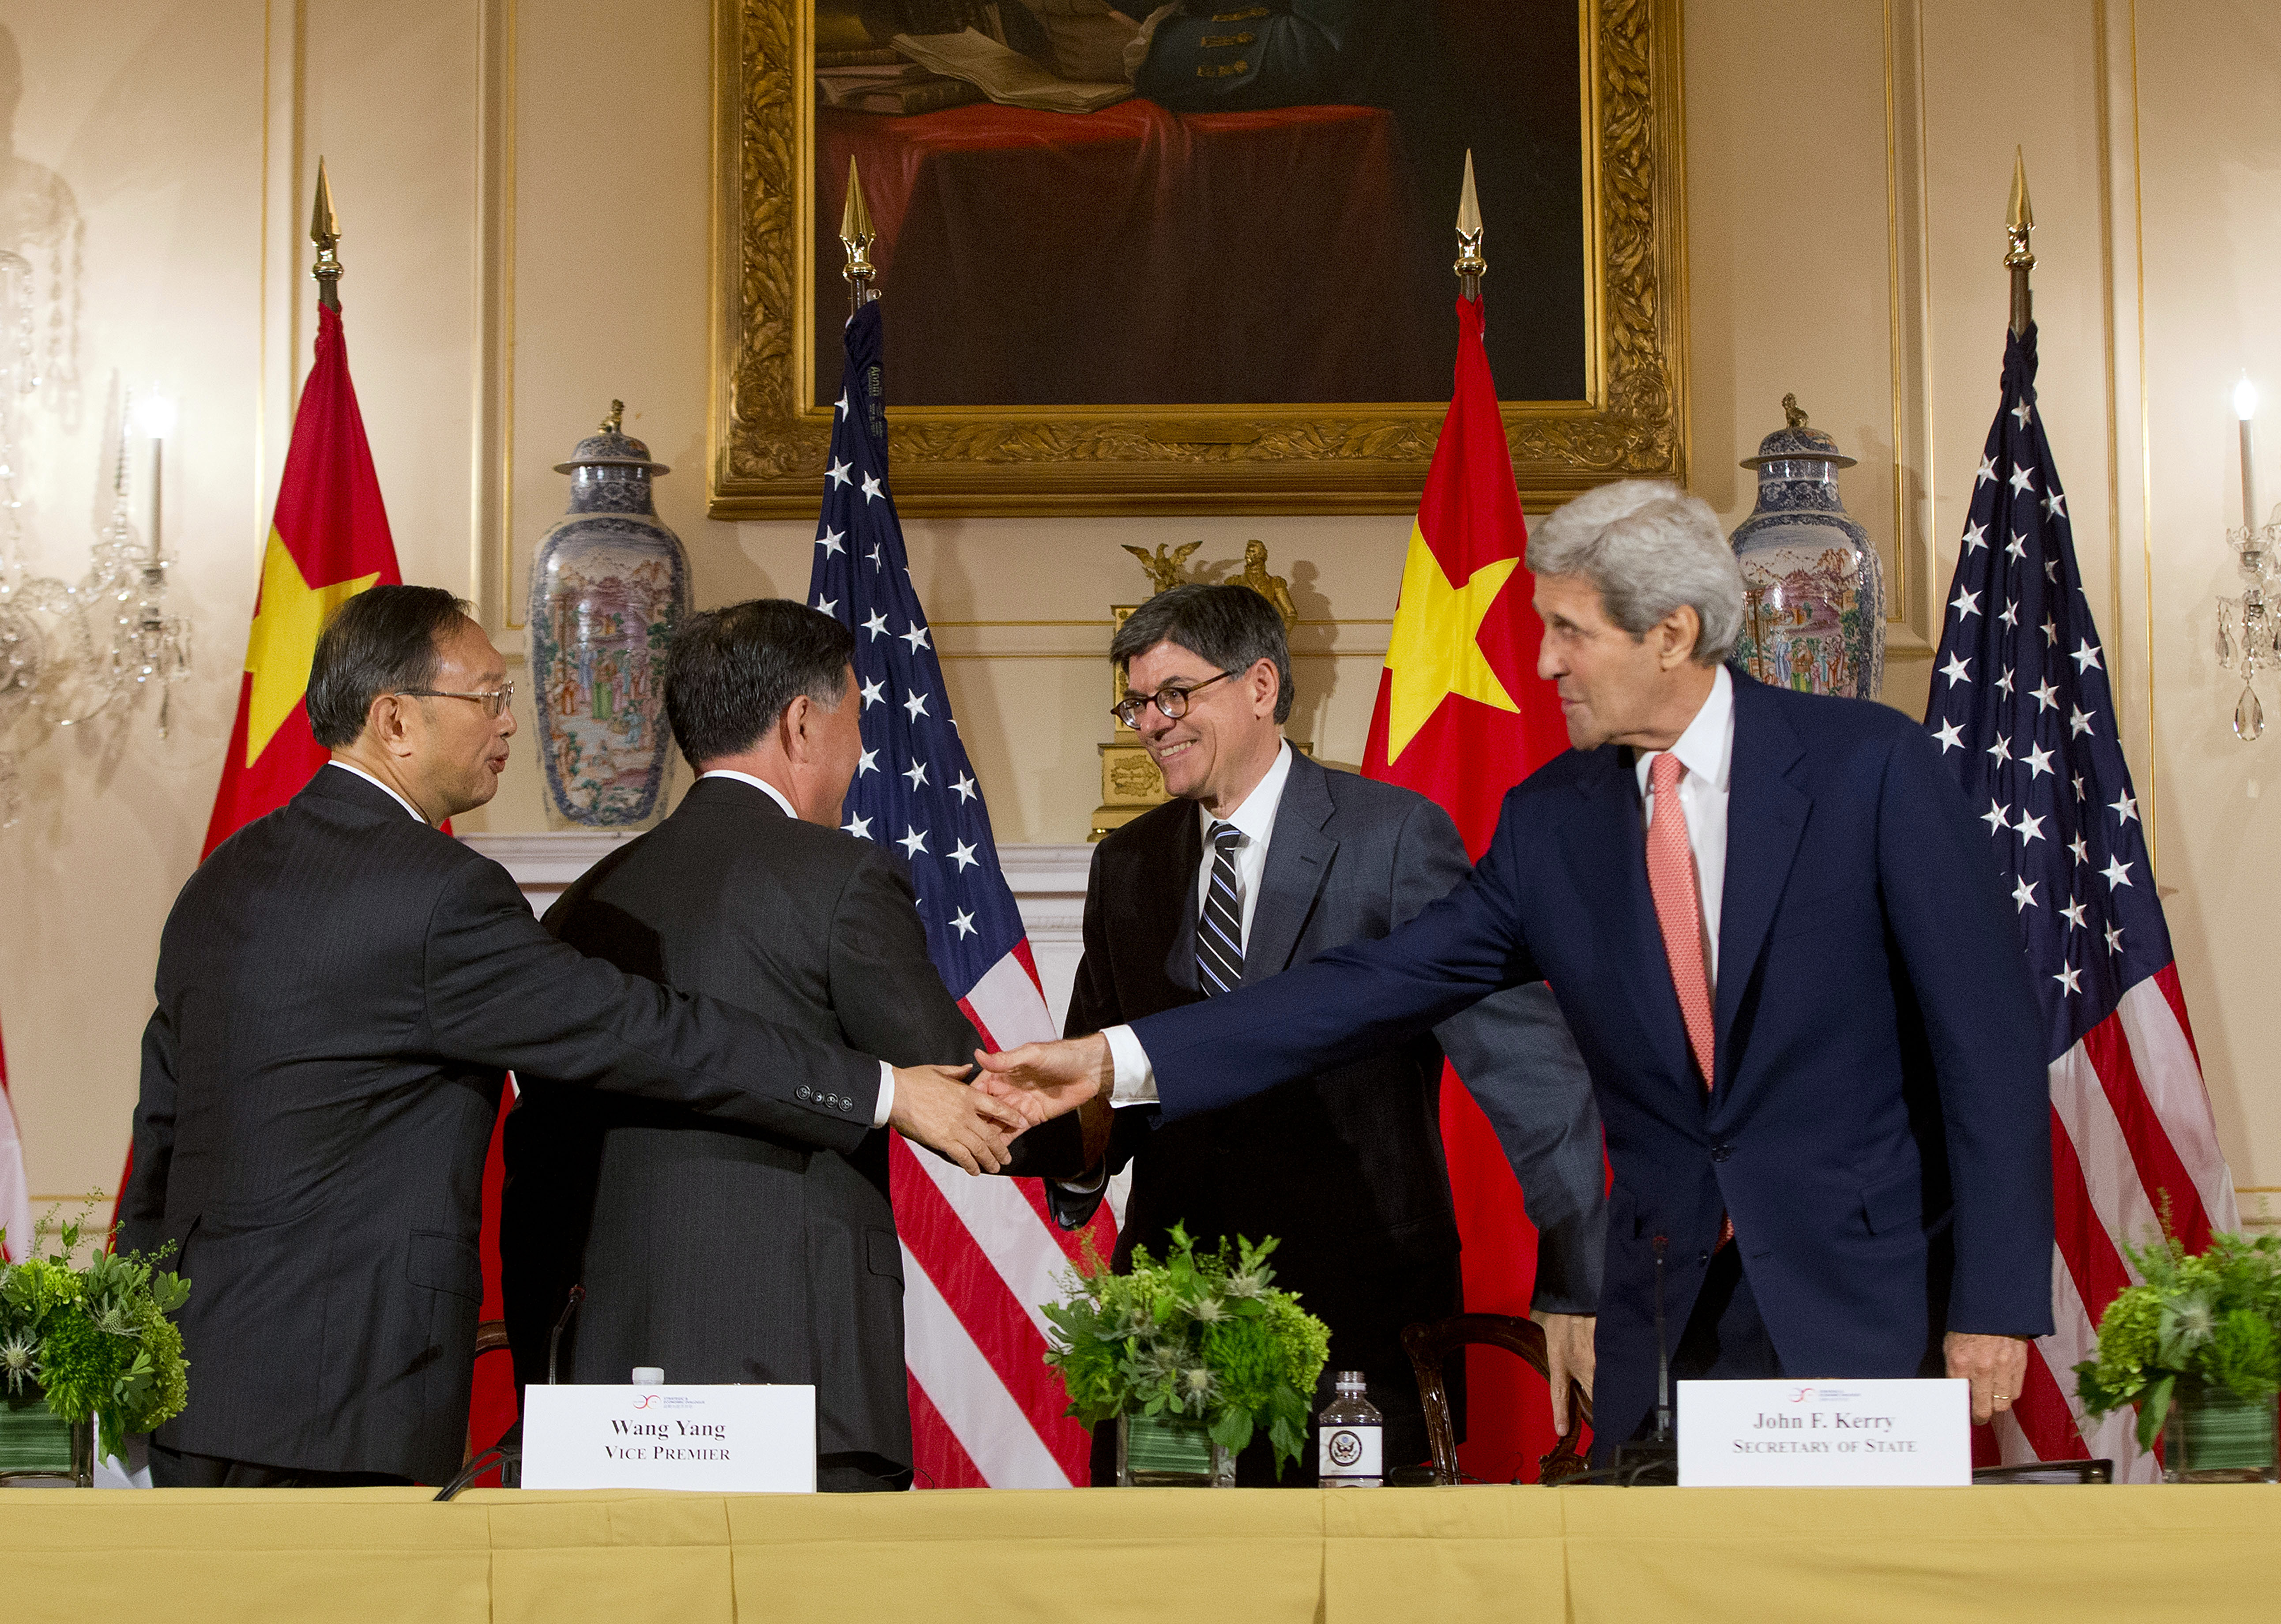 (From left) China's State Councilor Yang Jiechi, China's Vice Premier Wang Yang, Secretary of Treasury Jack Lew and Secretary of State John Kerry shake hands following the conclusion of the US China Closing Statements at US China Strategic and Economic Dialogue at the US State Department in Washington. Photo: AP